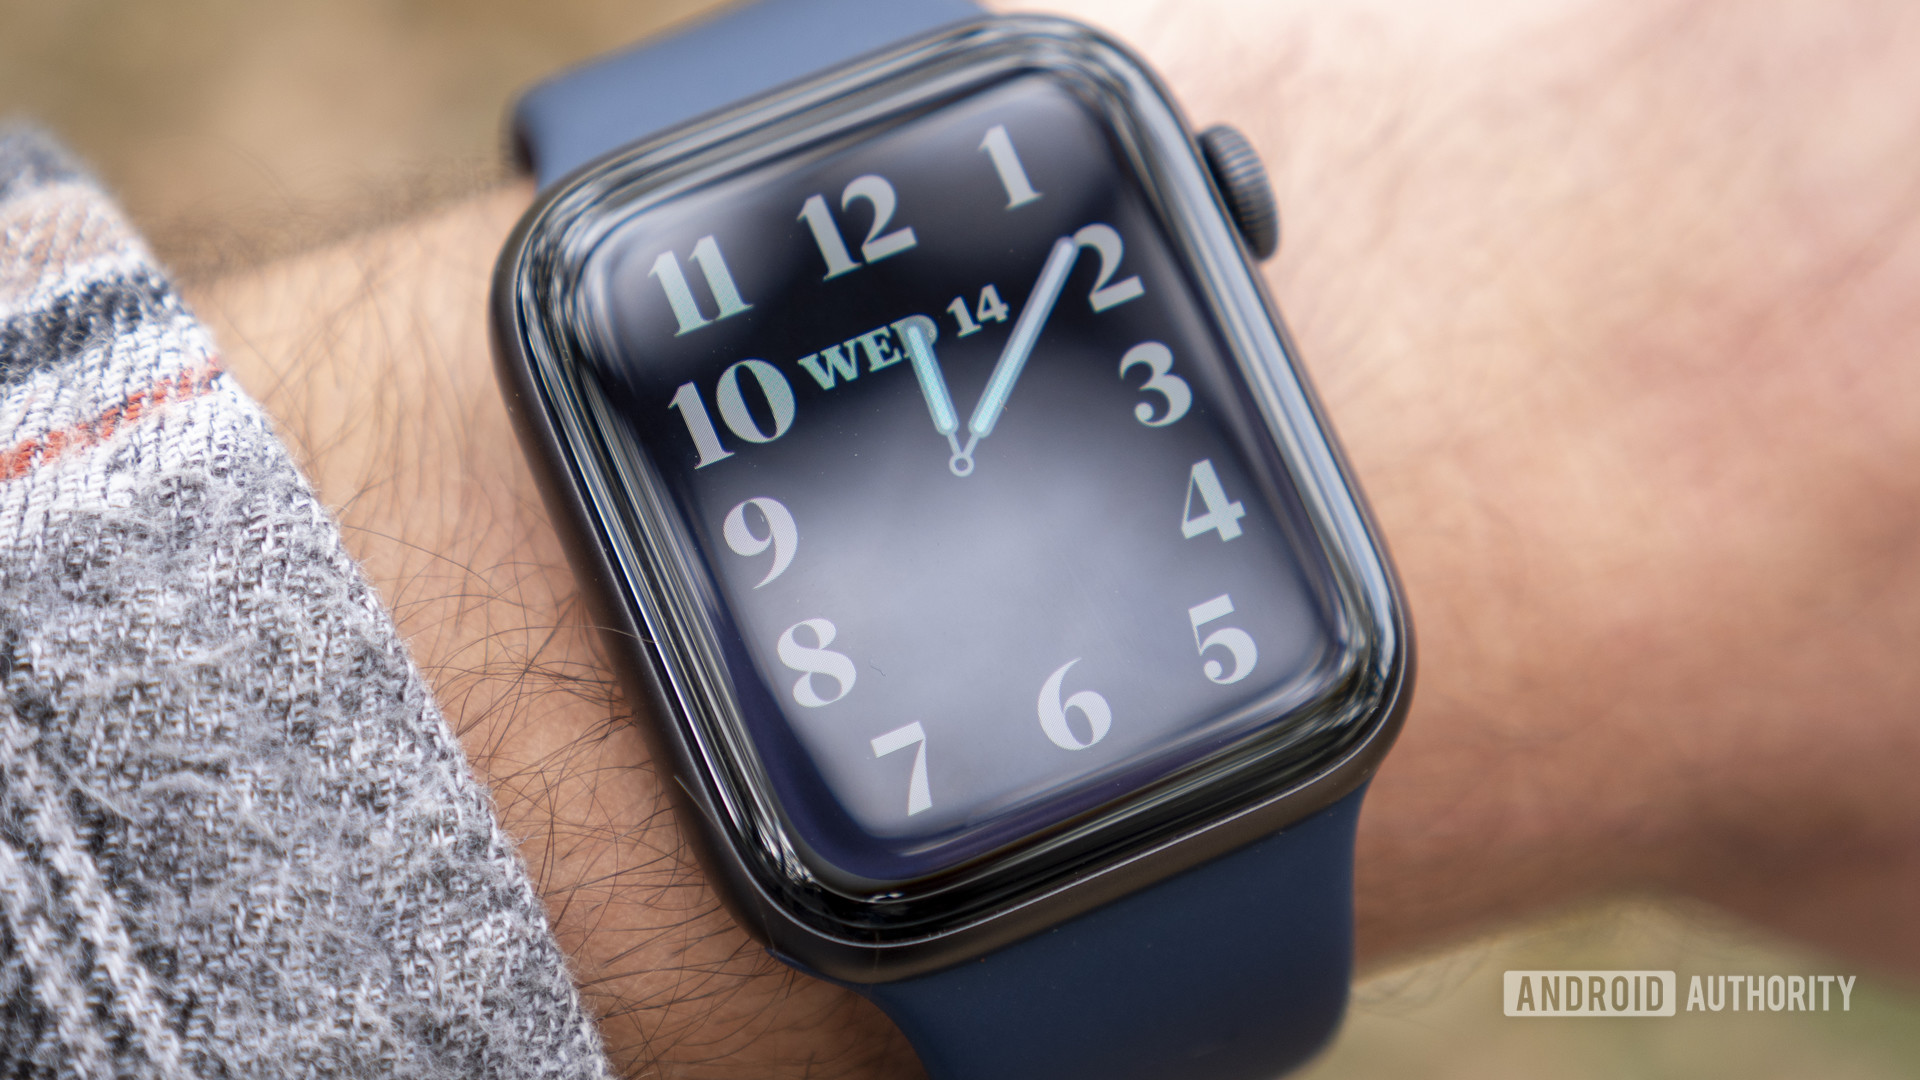 Apple Watch Series 6 review: should you buy it or SE/Series 3